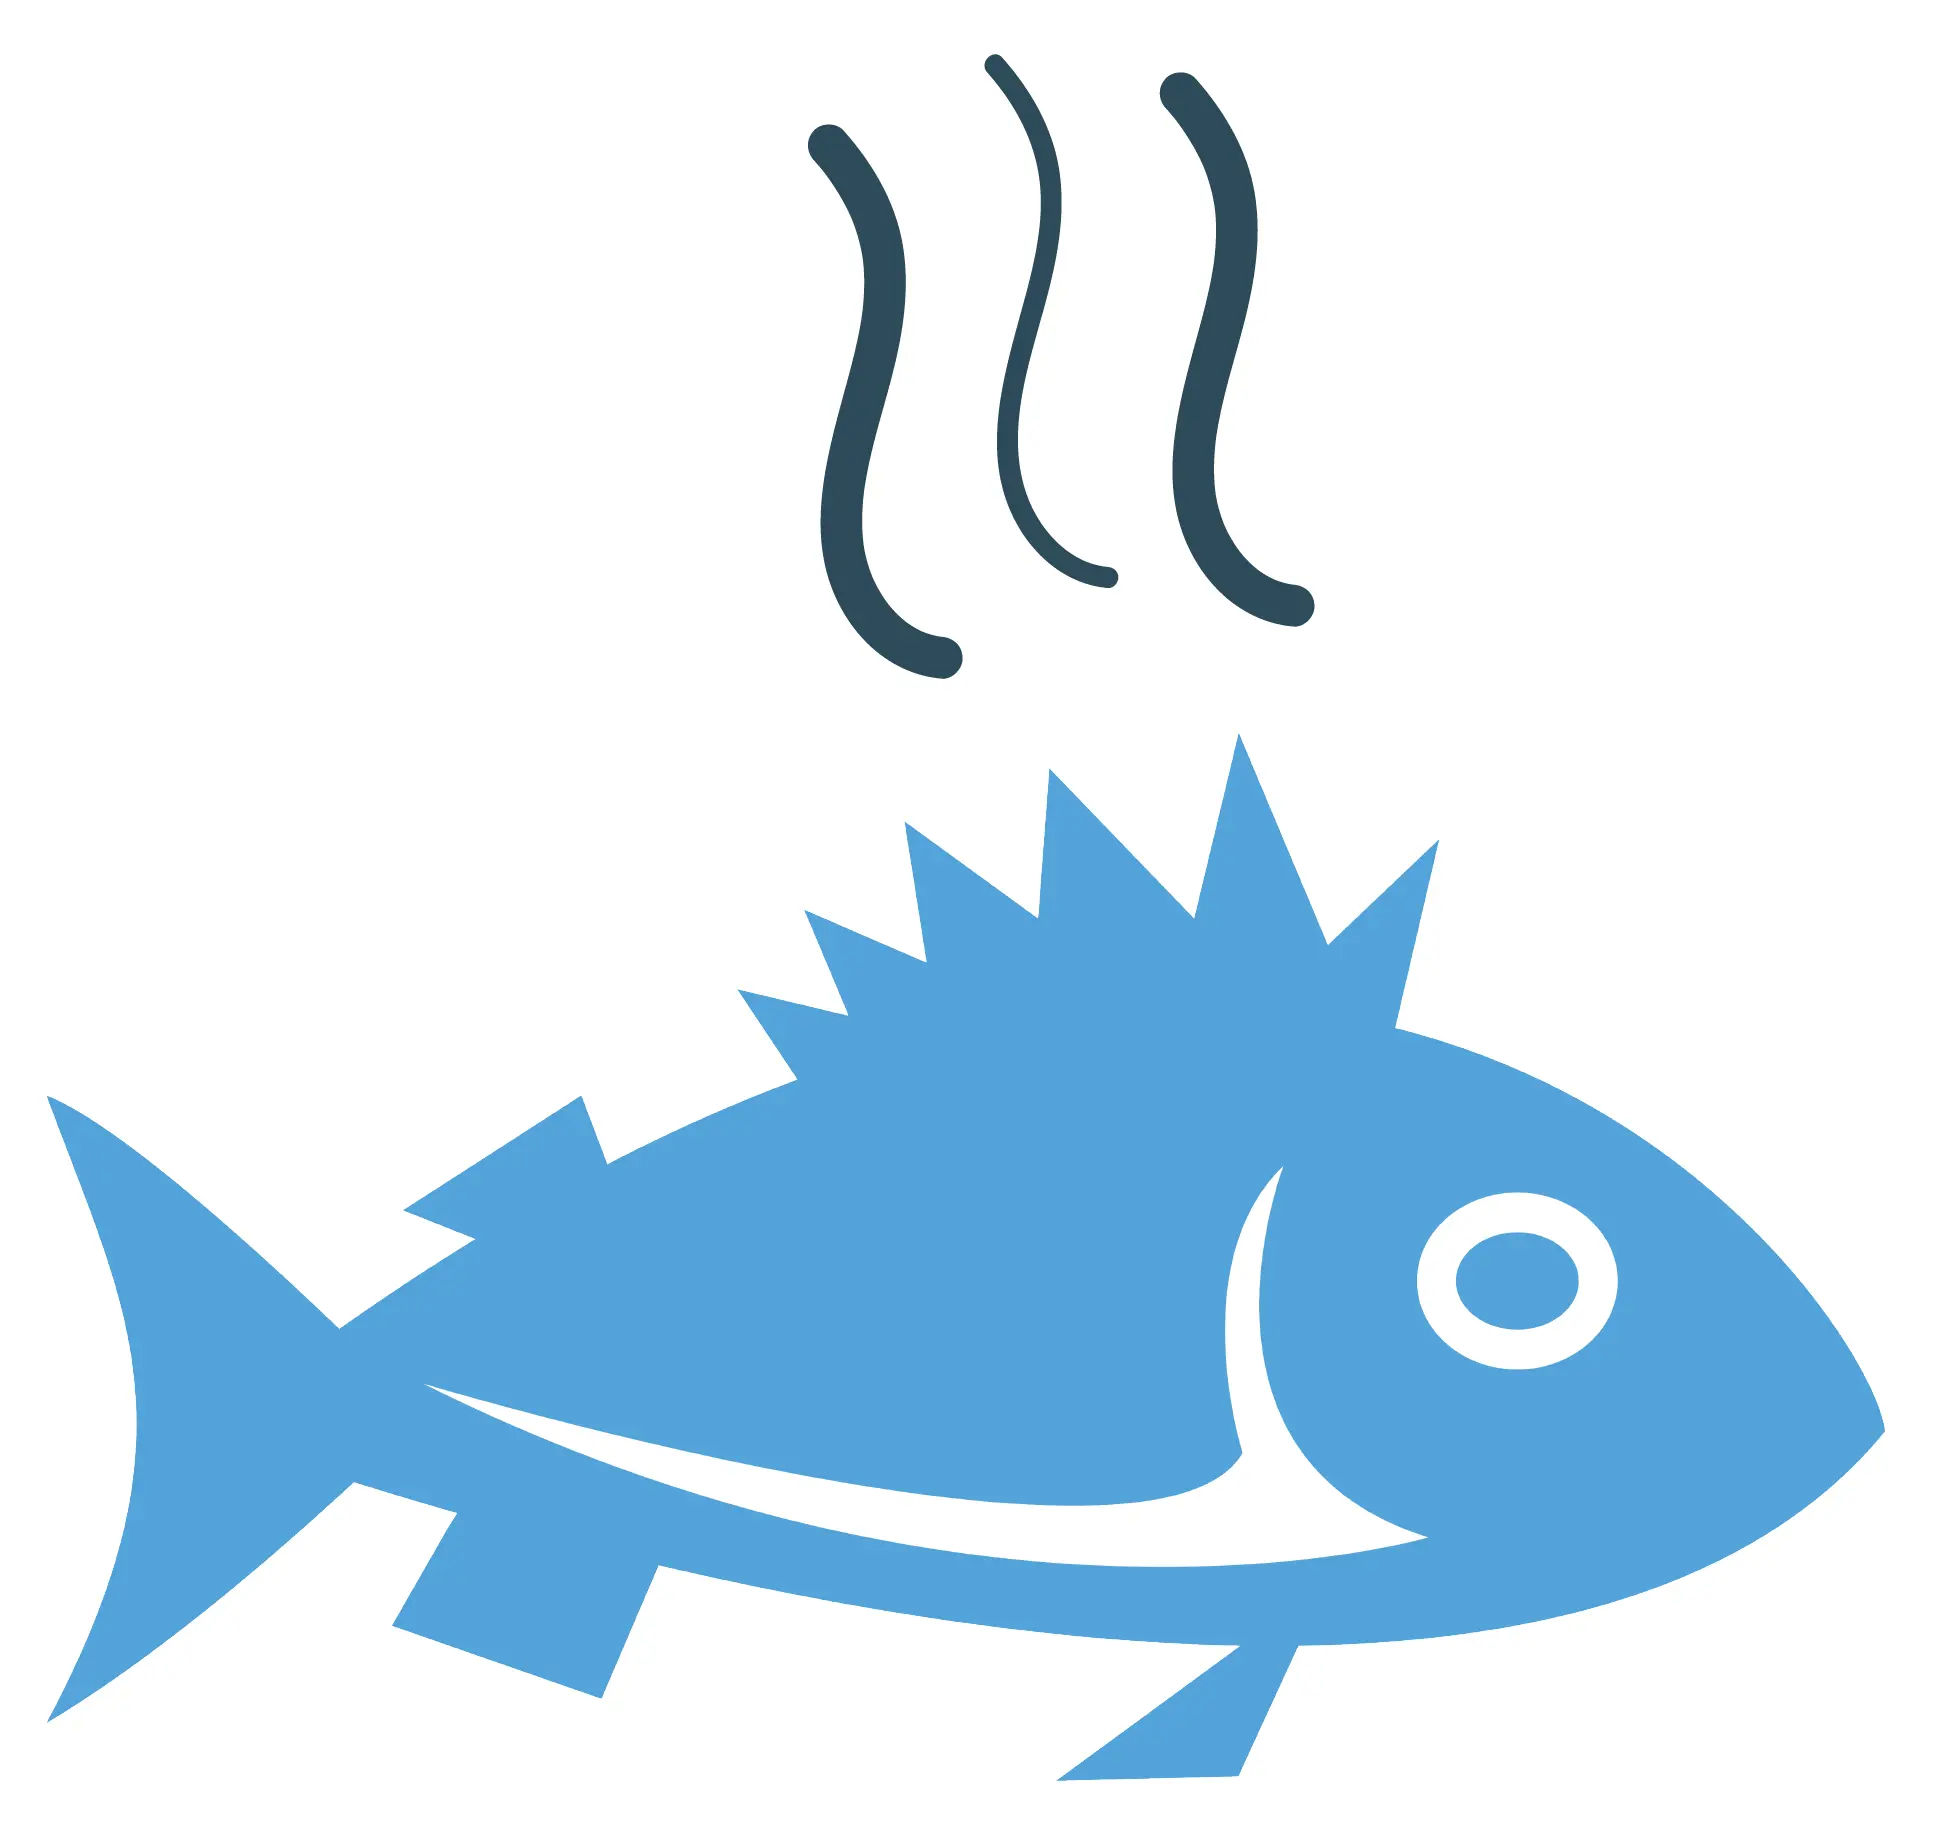 Some people perceive fish smell more intensely.